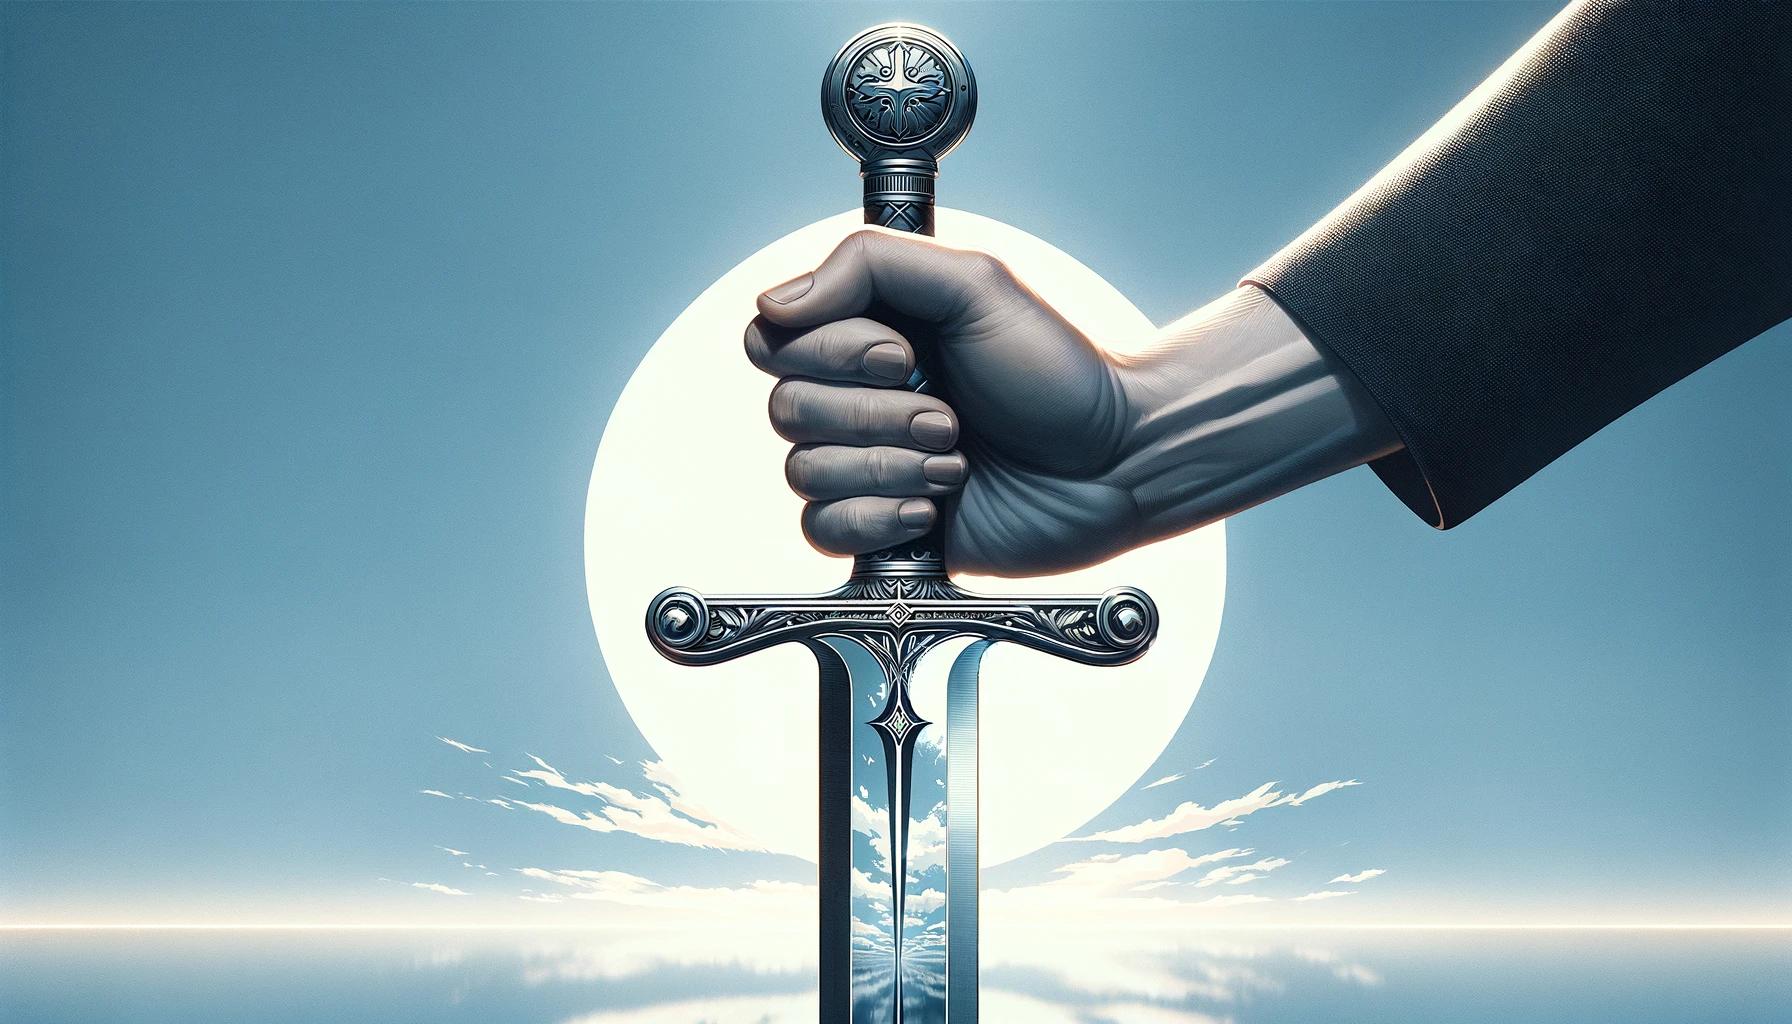 a 169 image featuring a solitary hand confidently gripping the Ace of Swords from the Tarot The hand should be depicted with a sense of determination and strength showcasing its